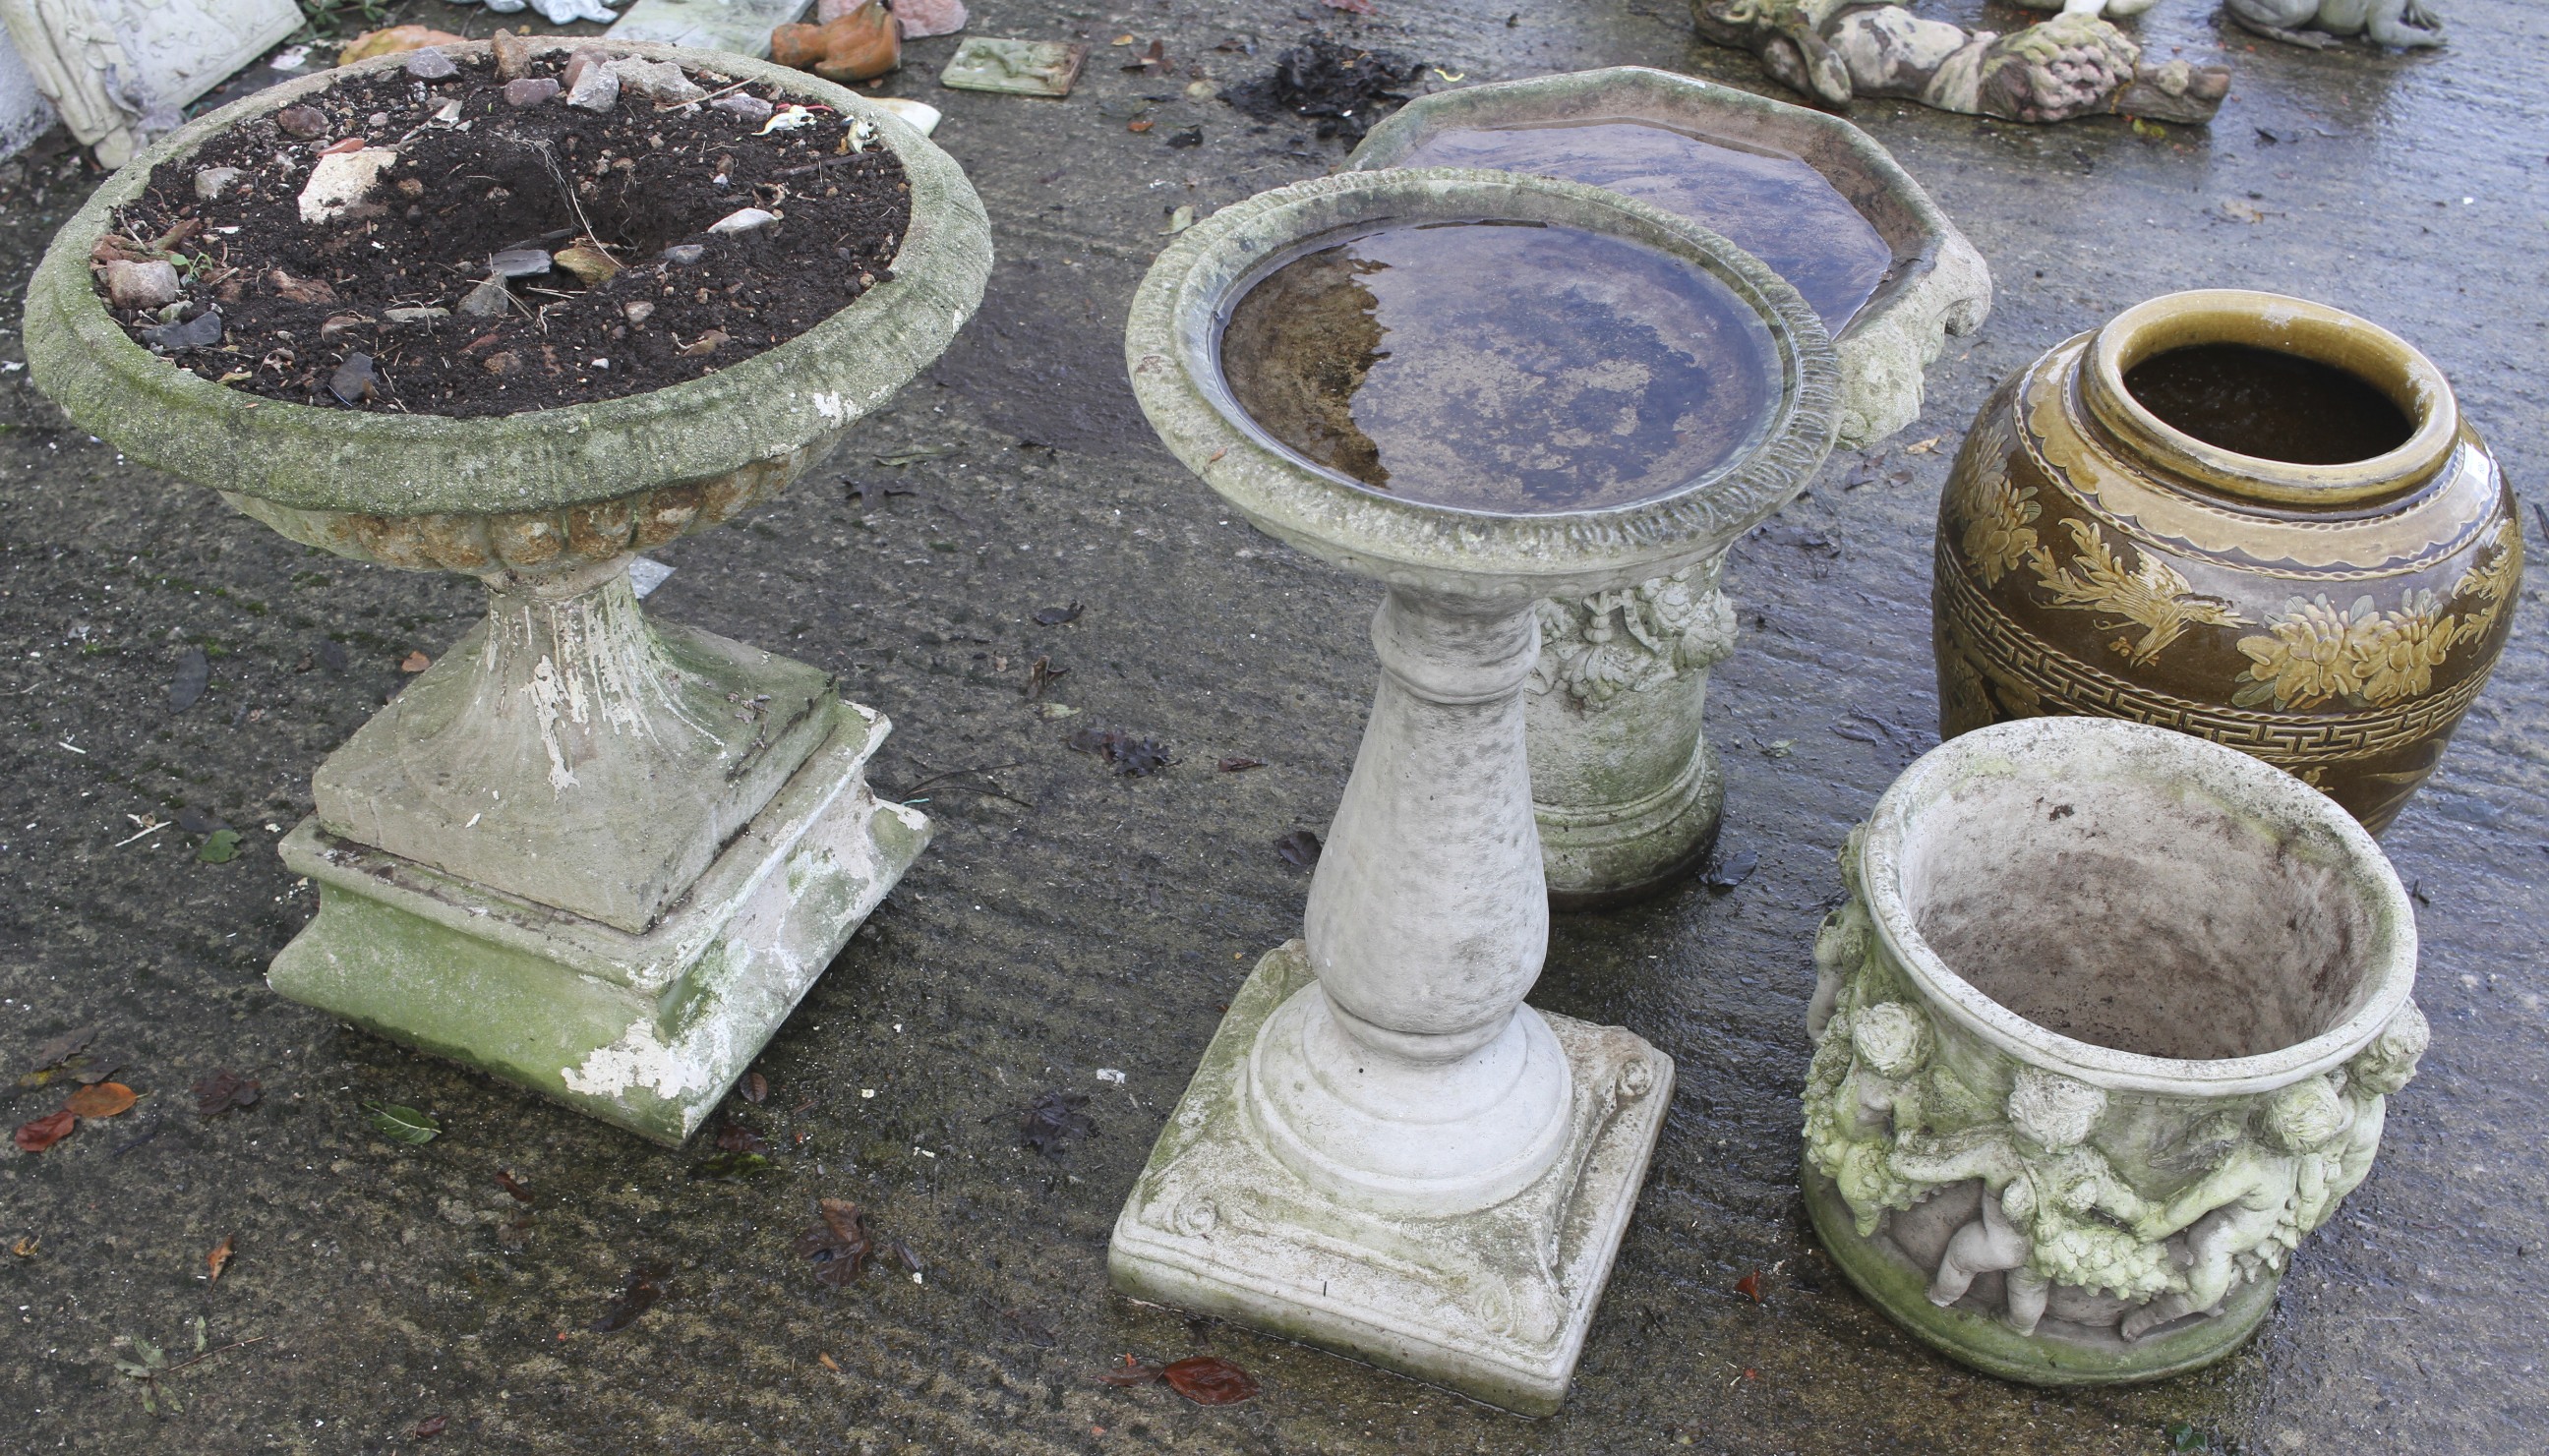 An assortment of garden pots and ornaments. - Image 3 of 3